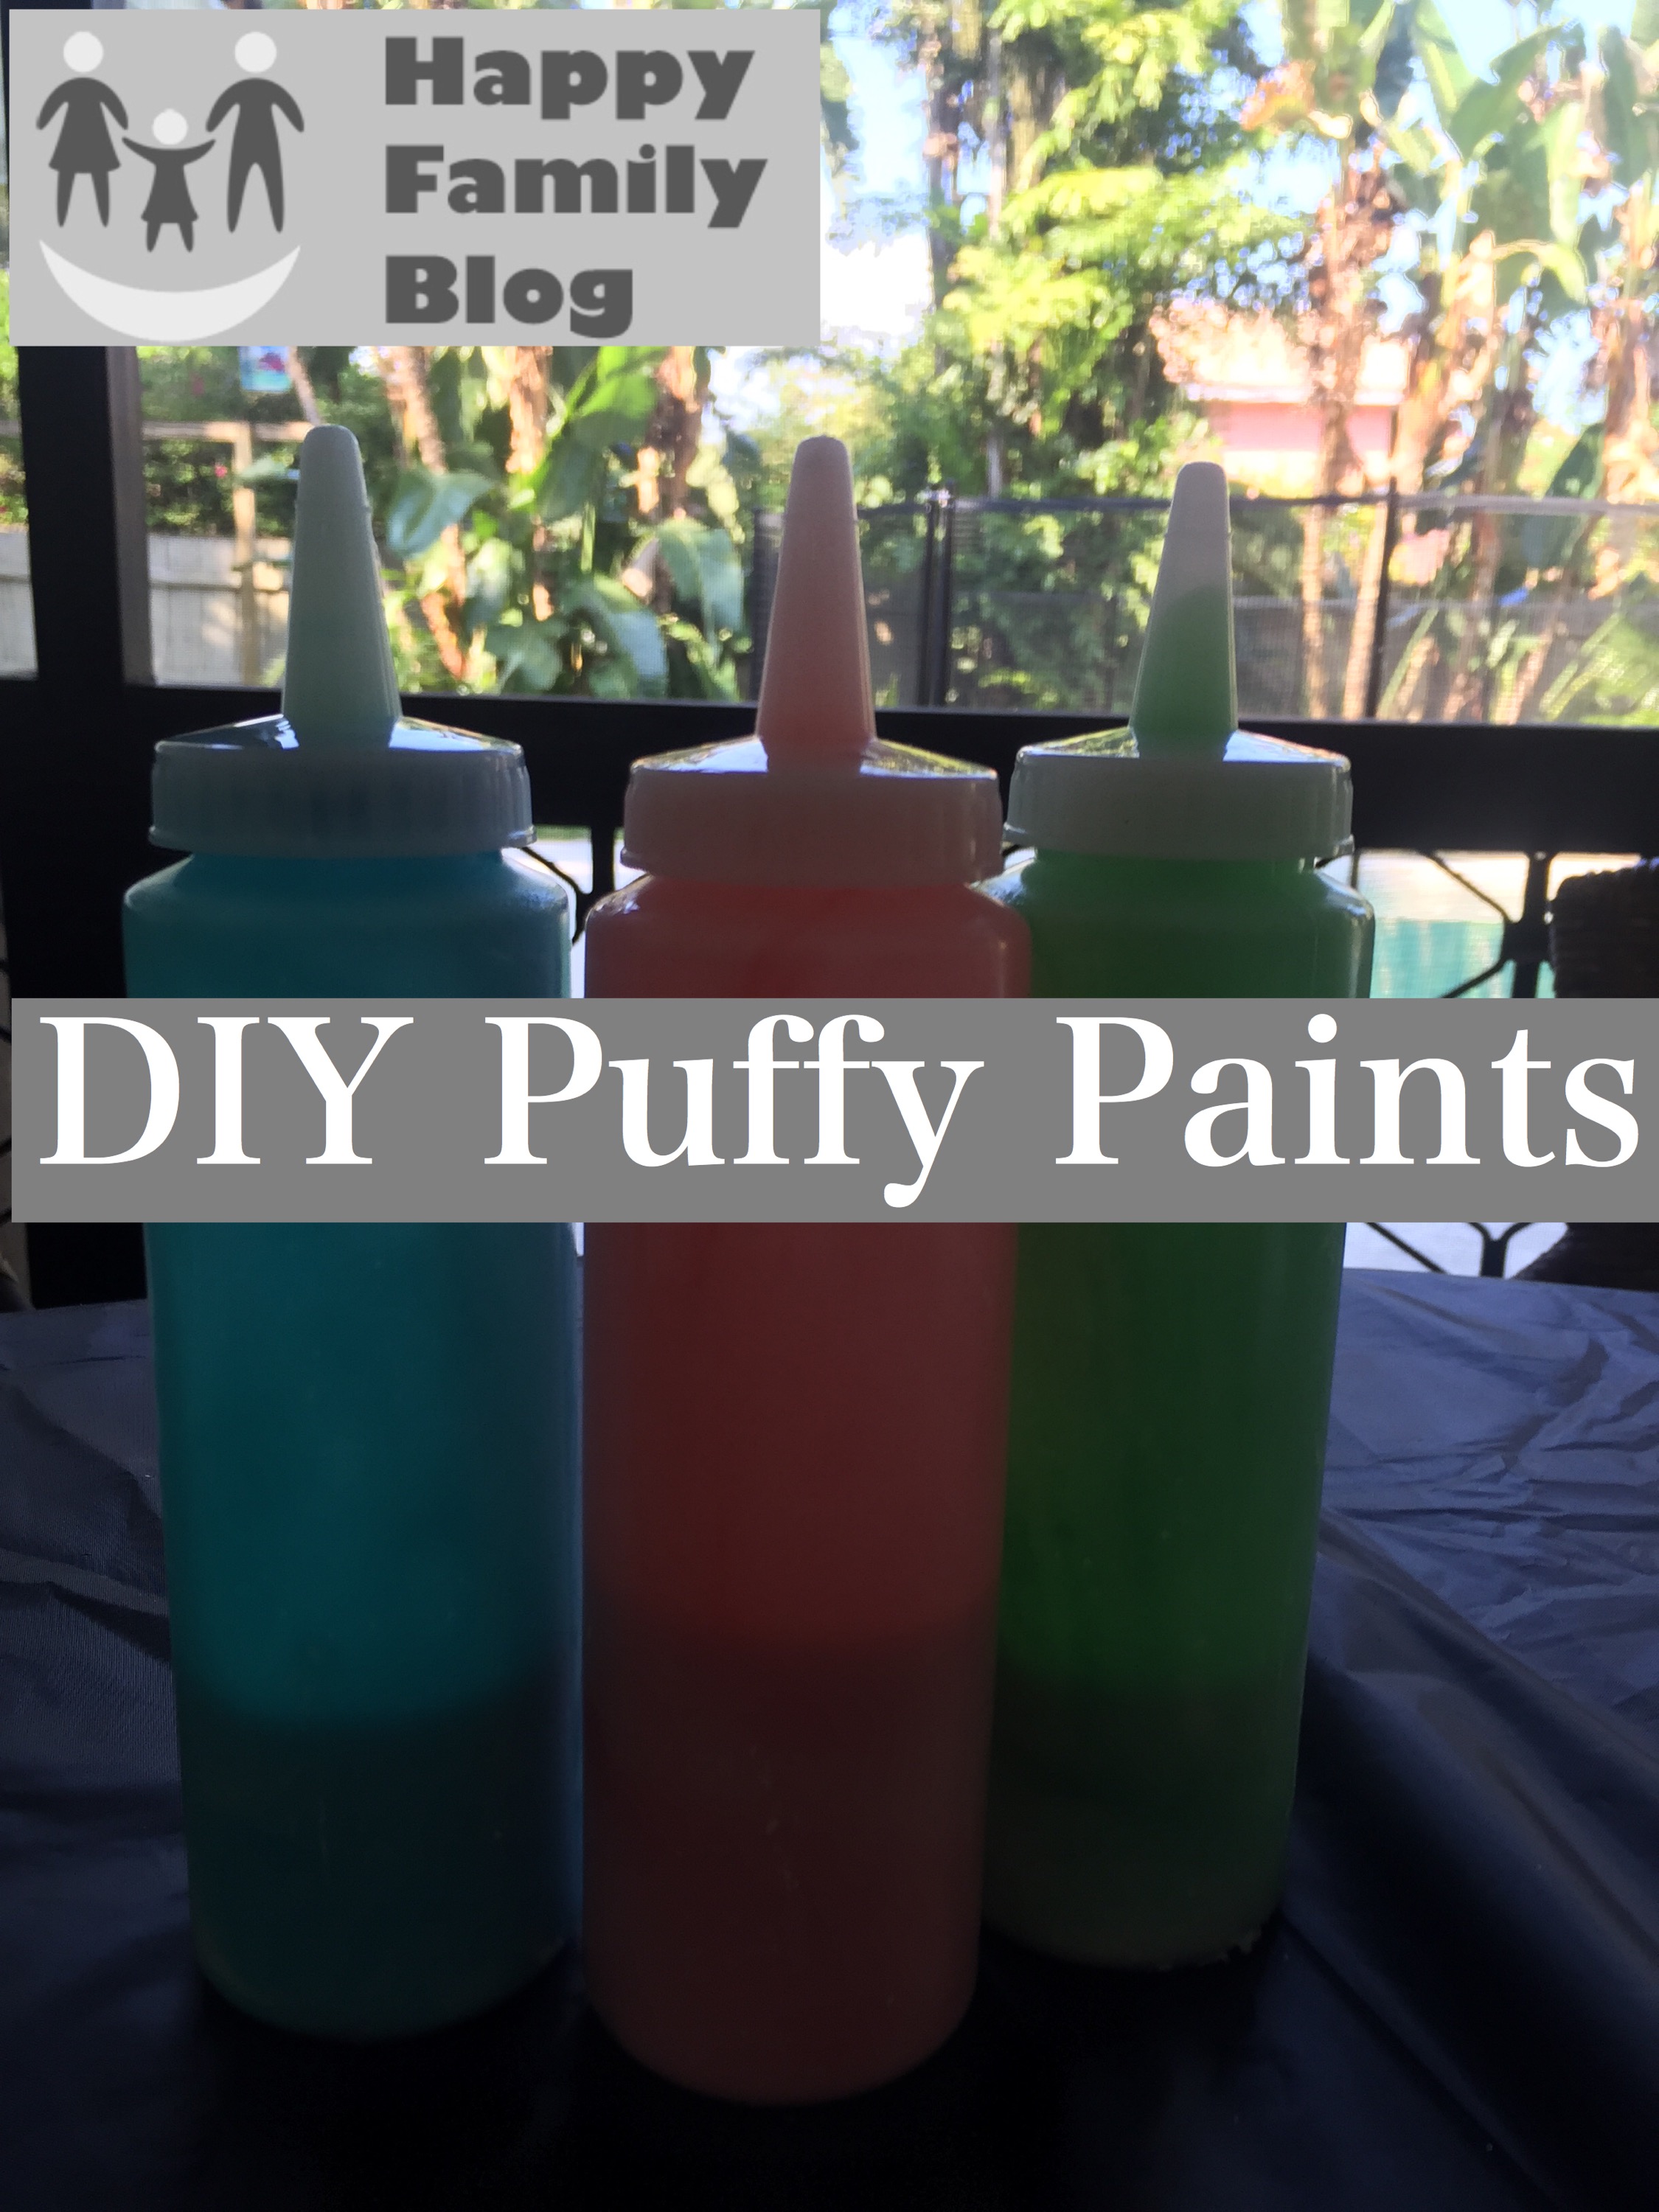 DIY Puffy Paints by Happy Family Blog